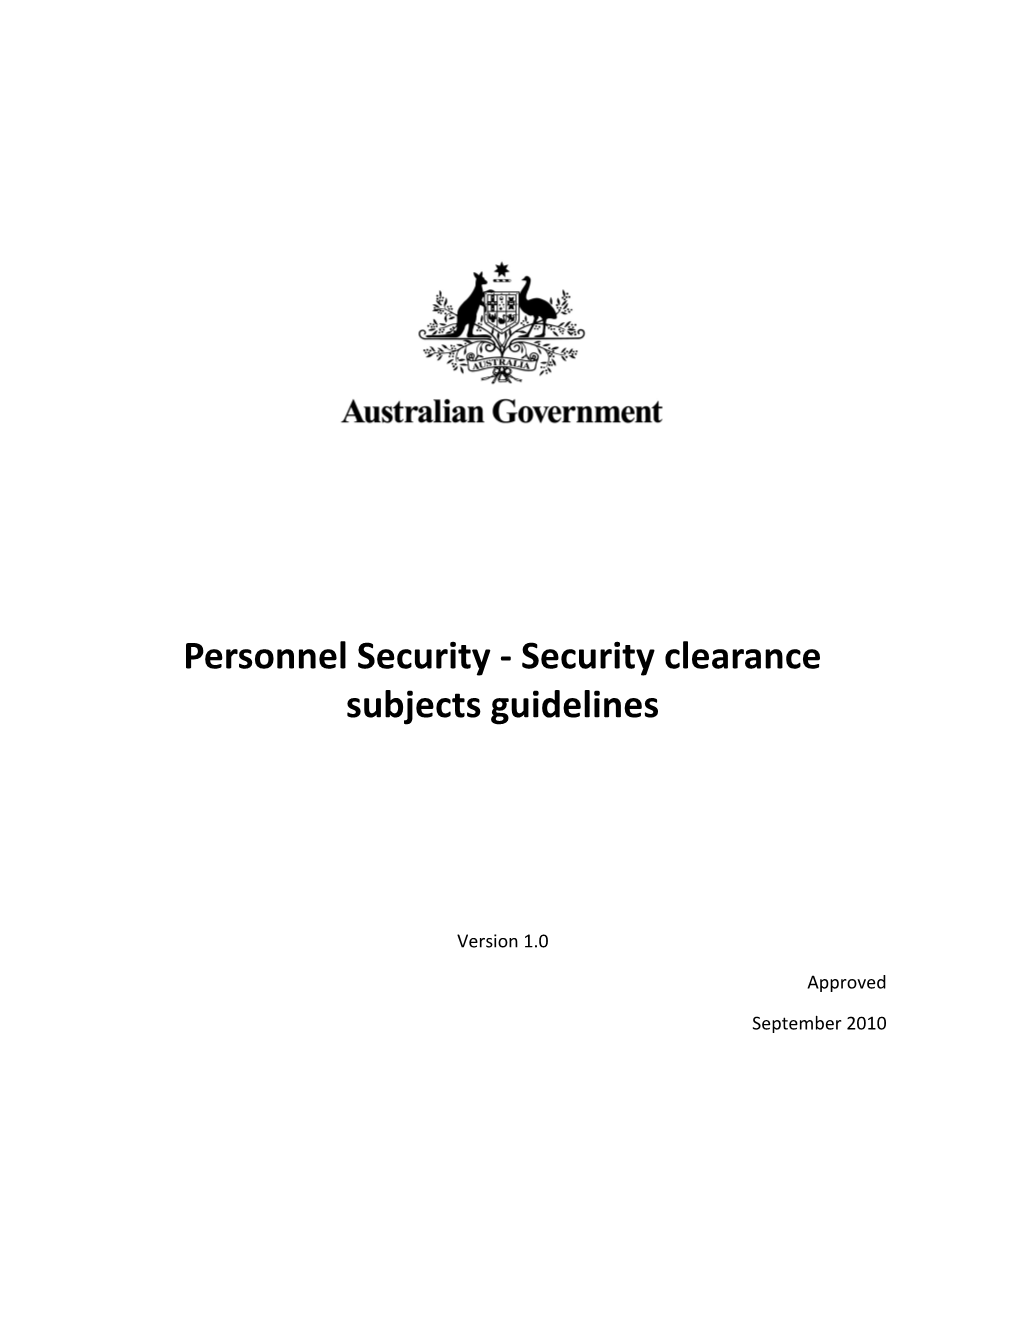 Personnel Security - Security Clearance Subjects Guideline S